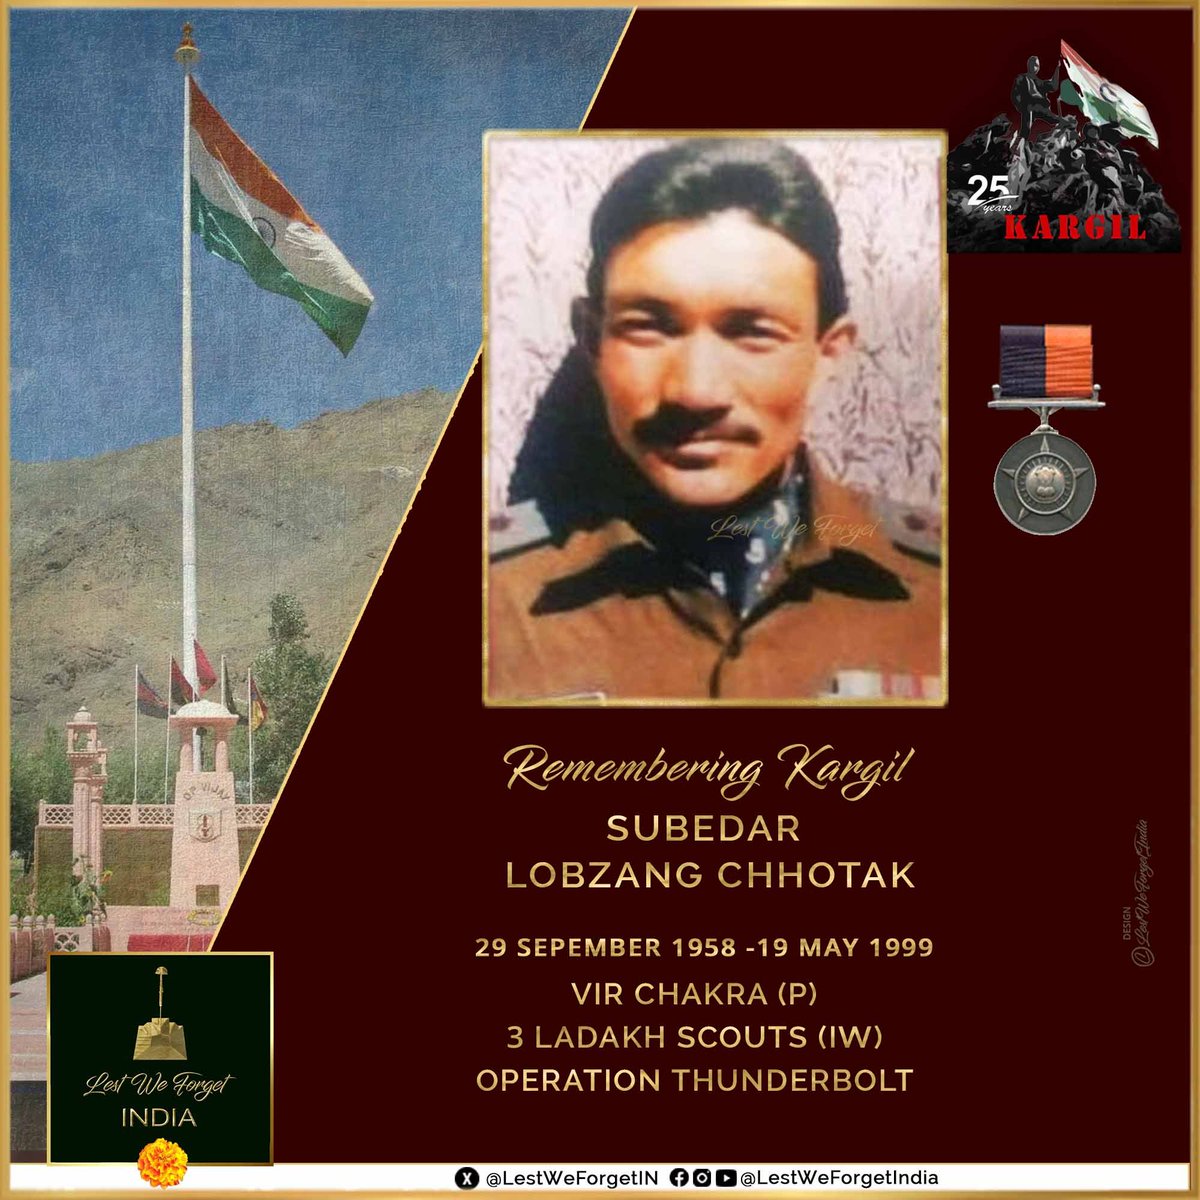 Commemorating 25 years of #Kargil #LestWeForgetIndia🇮🇳 Subedar Lobzang Chhotak, #VirChakra (P), Ladakh Scouts (IW) made the supreme sacrifice fighting the enemy at Point 5203, #OnThisDay 19 May 1999 Sub Chhotak of lndus Wing Ladakh Scouts, was patrol leader of a special